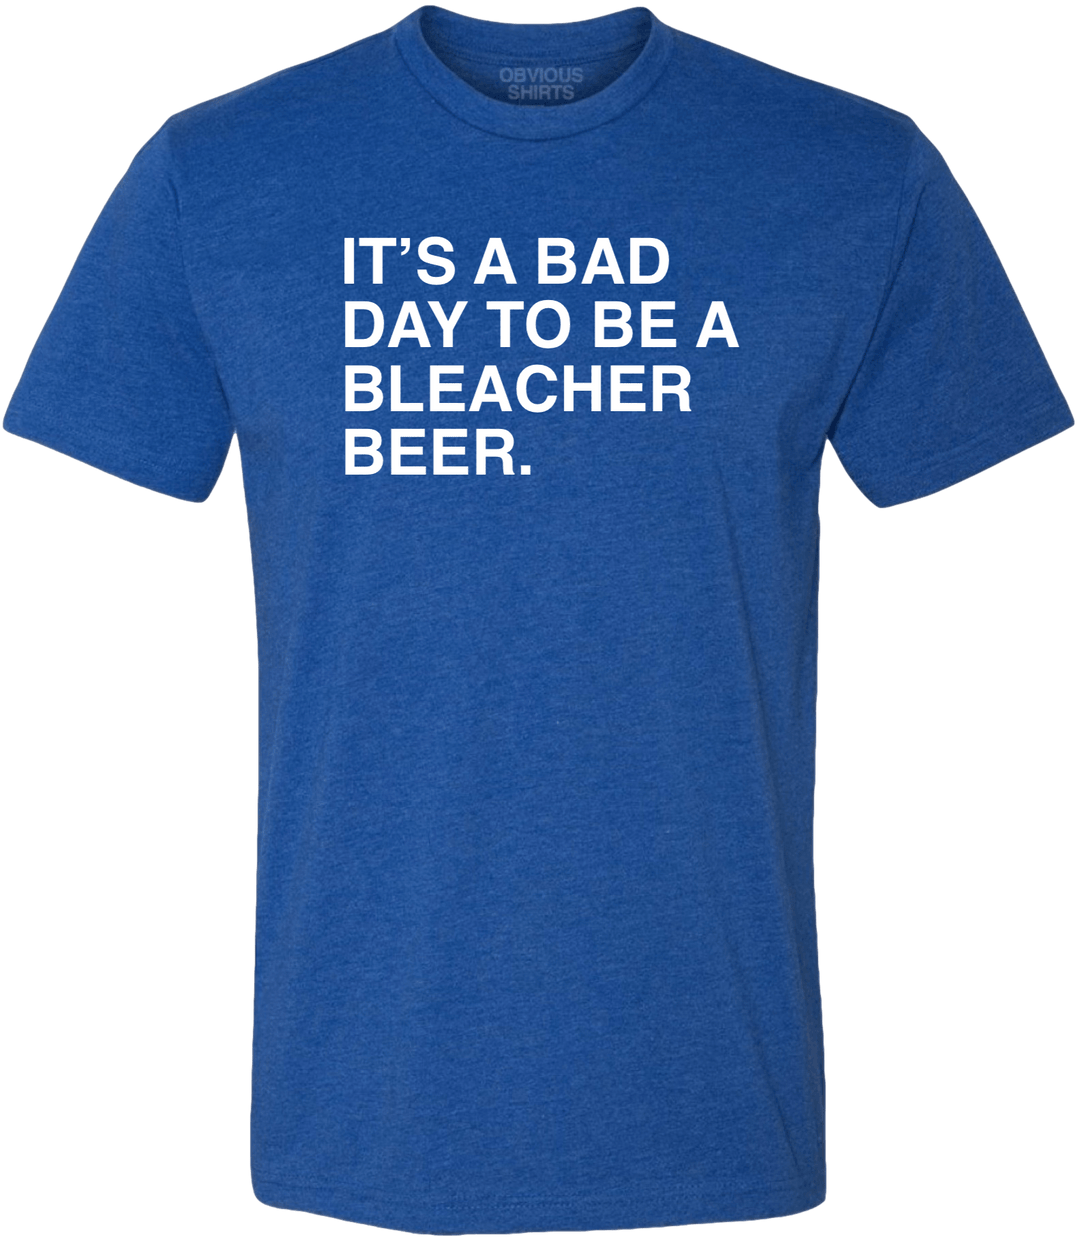 IT'S A BAD DAY TO BE A BLEACHER BEER. - OBVIOUS SHIRTS.